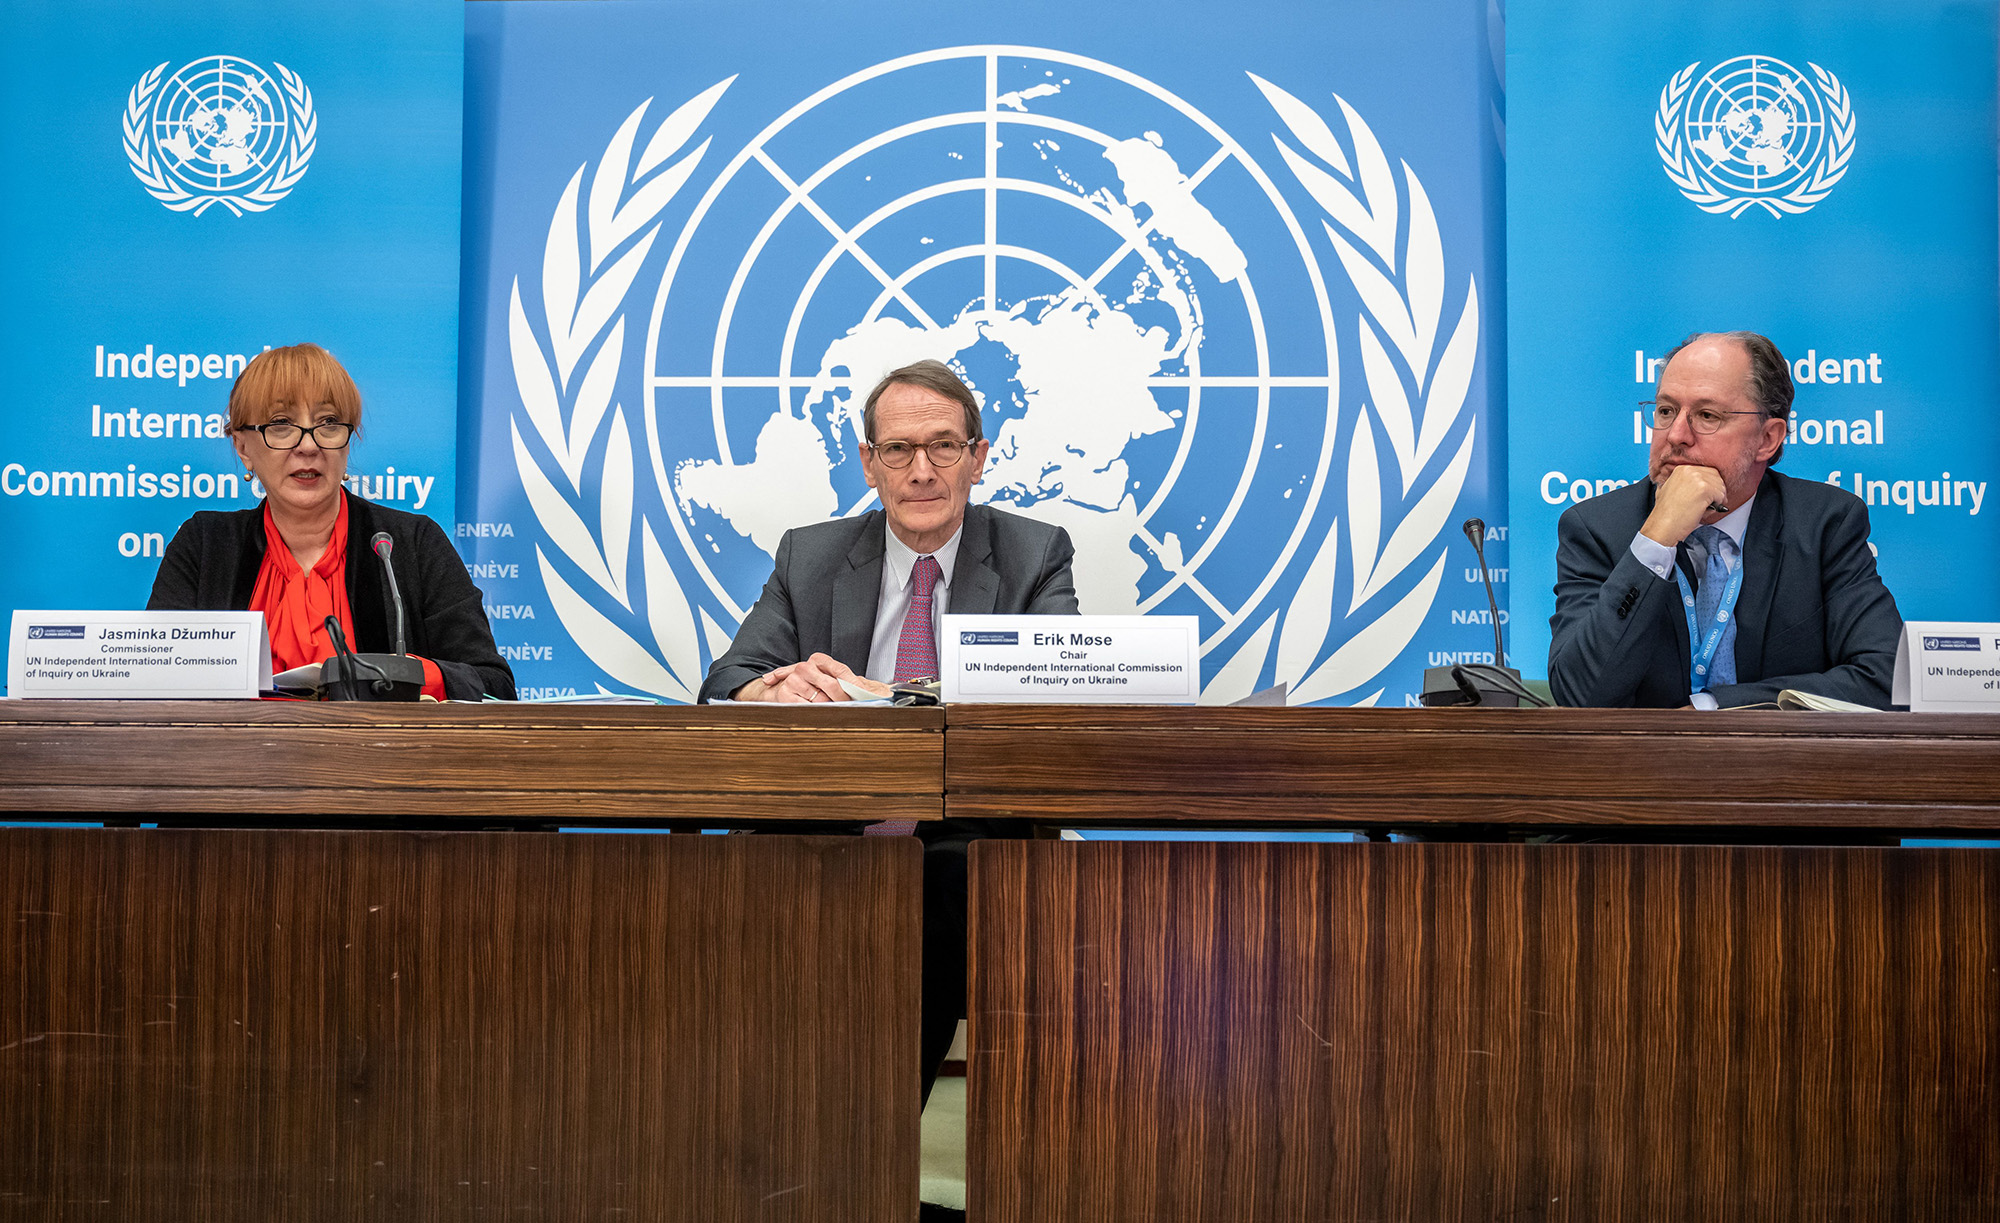 Chair of the Independent International Commission of Inquiry on Ukraine, Erik Mose, center, and members Jasminka Dzumhur, left, and Pablo de Greiff attend a news conference to present the report containing their latest findings in Geneva on March 16.